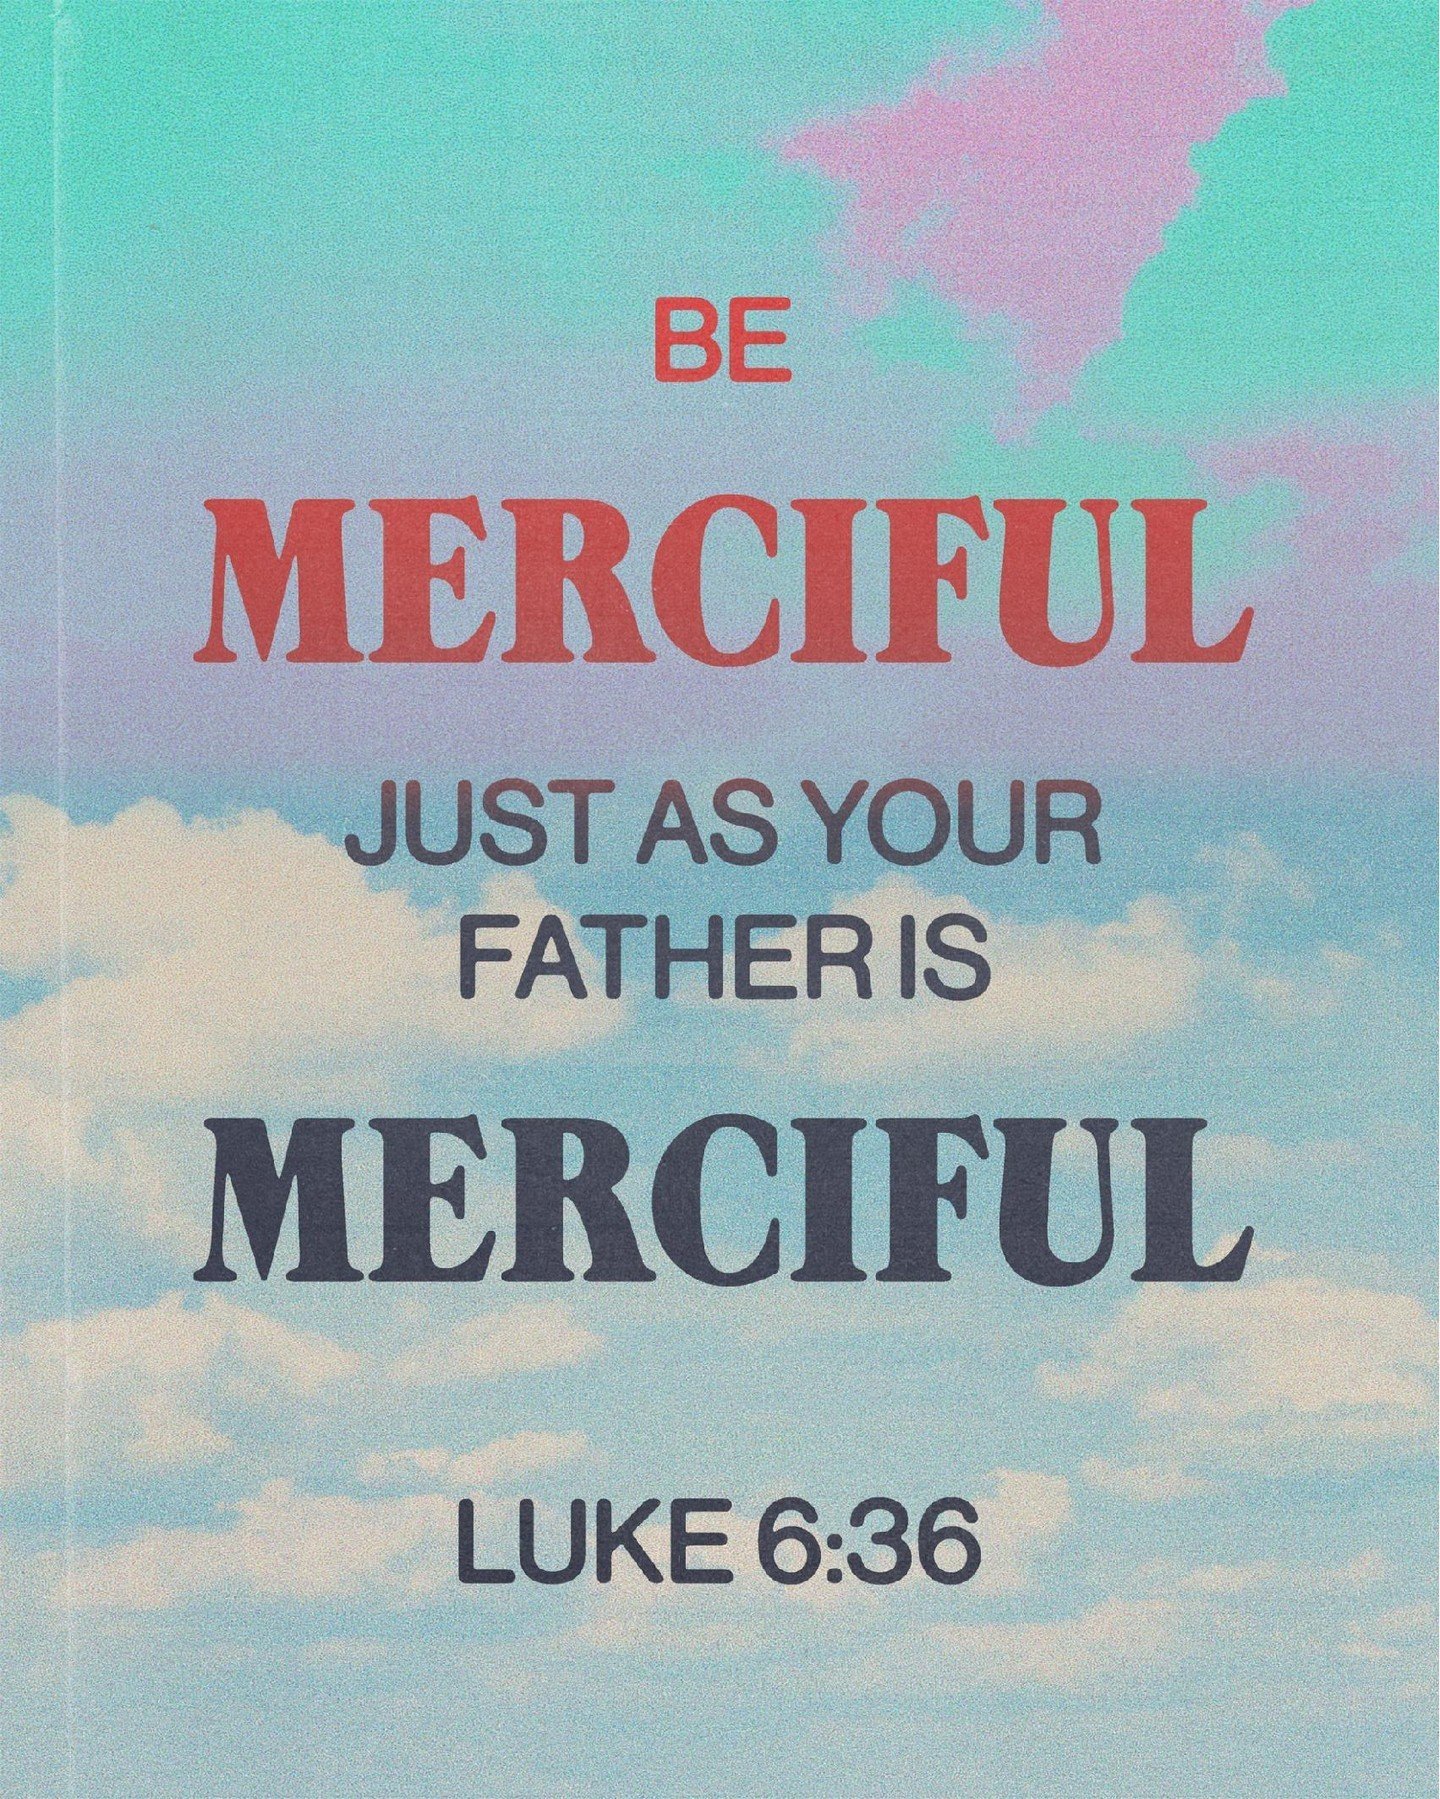 &quot;Be merciful, just as your Father is merciful.&quot; - Luke 6:36
.
.
.
#church #god #morning #jesus #christ #love #christian #worship #bible #luke